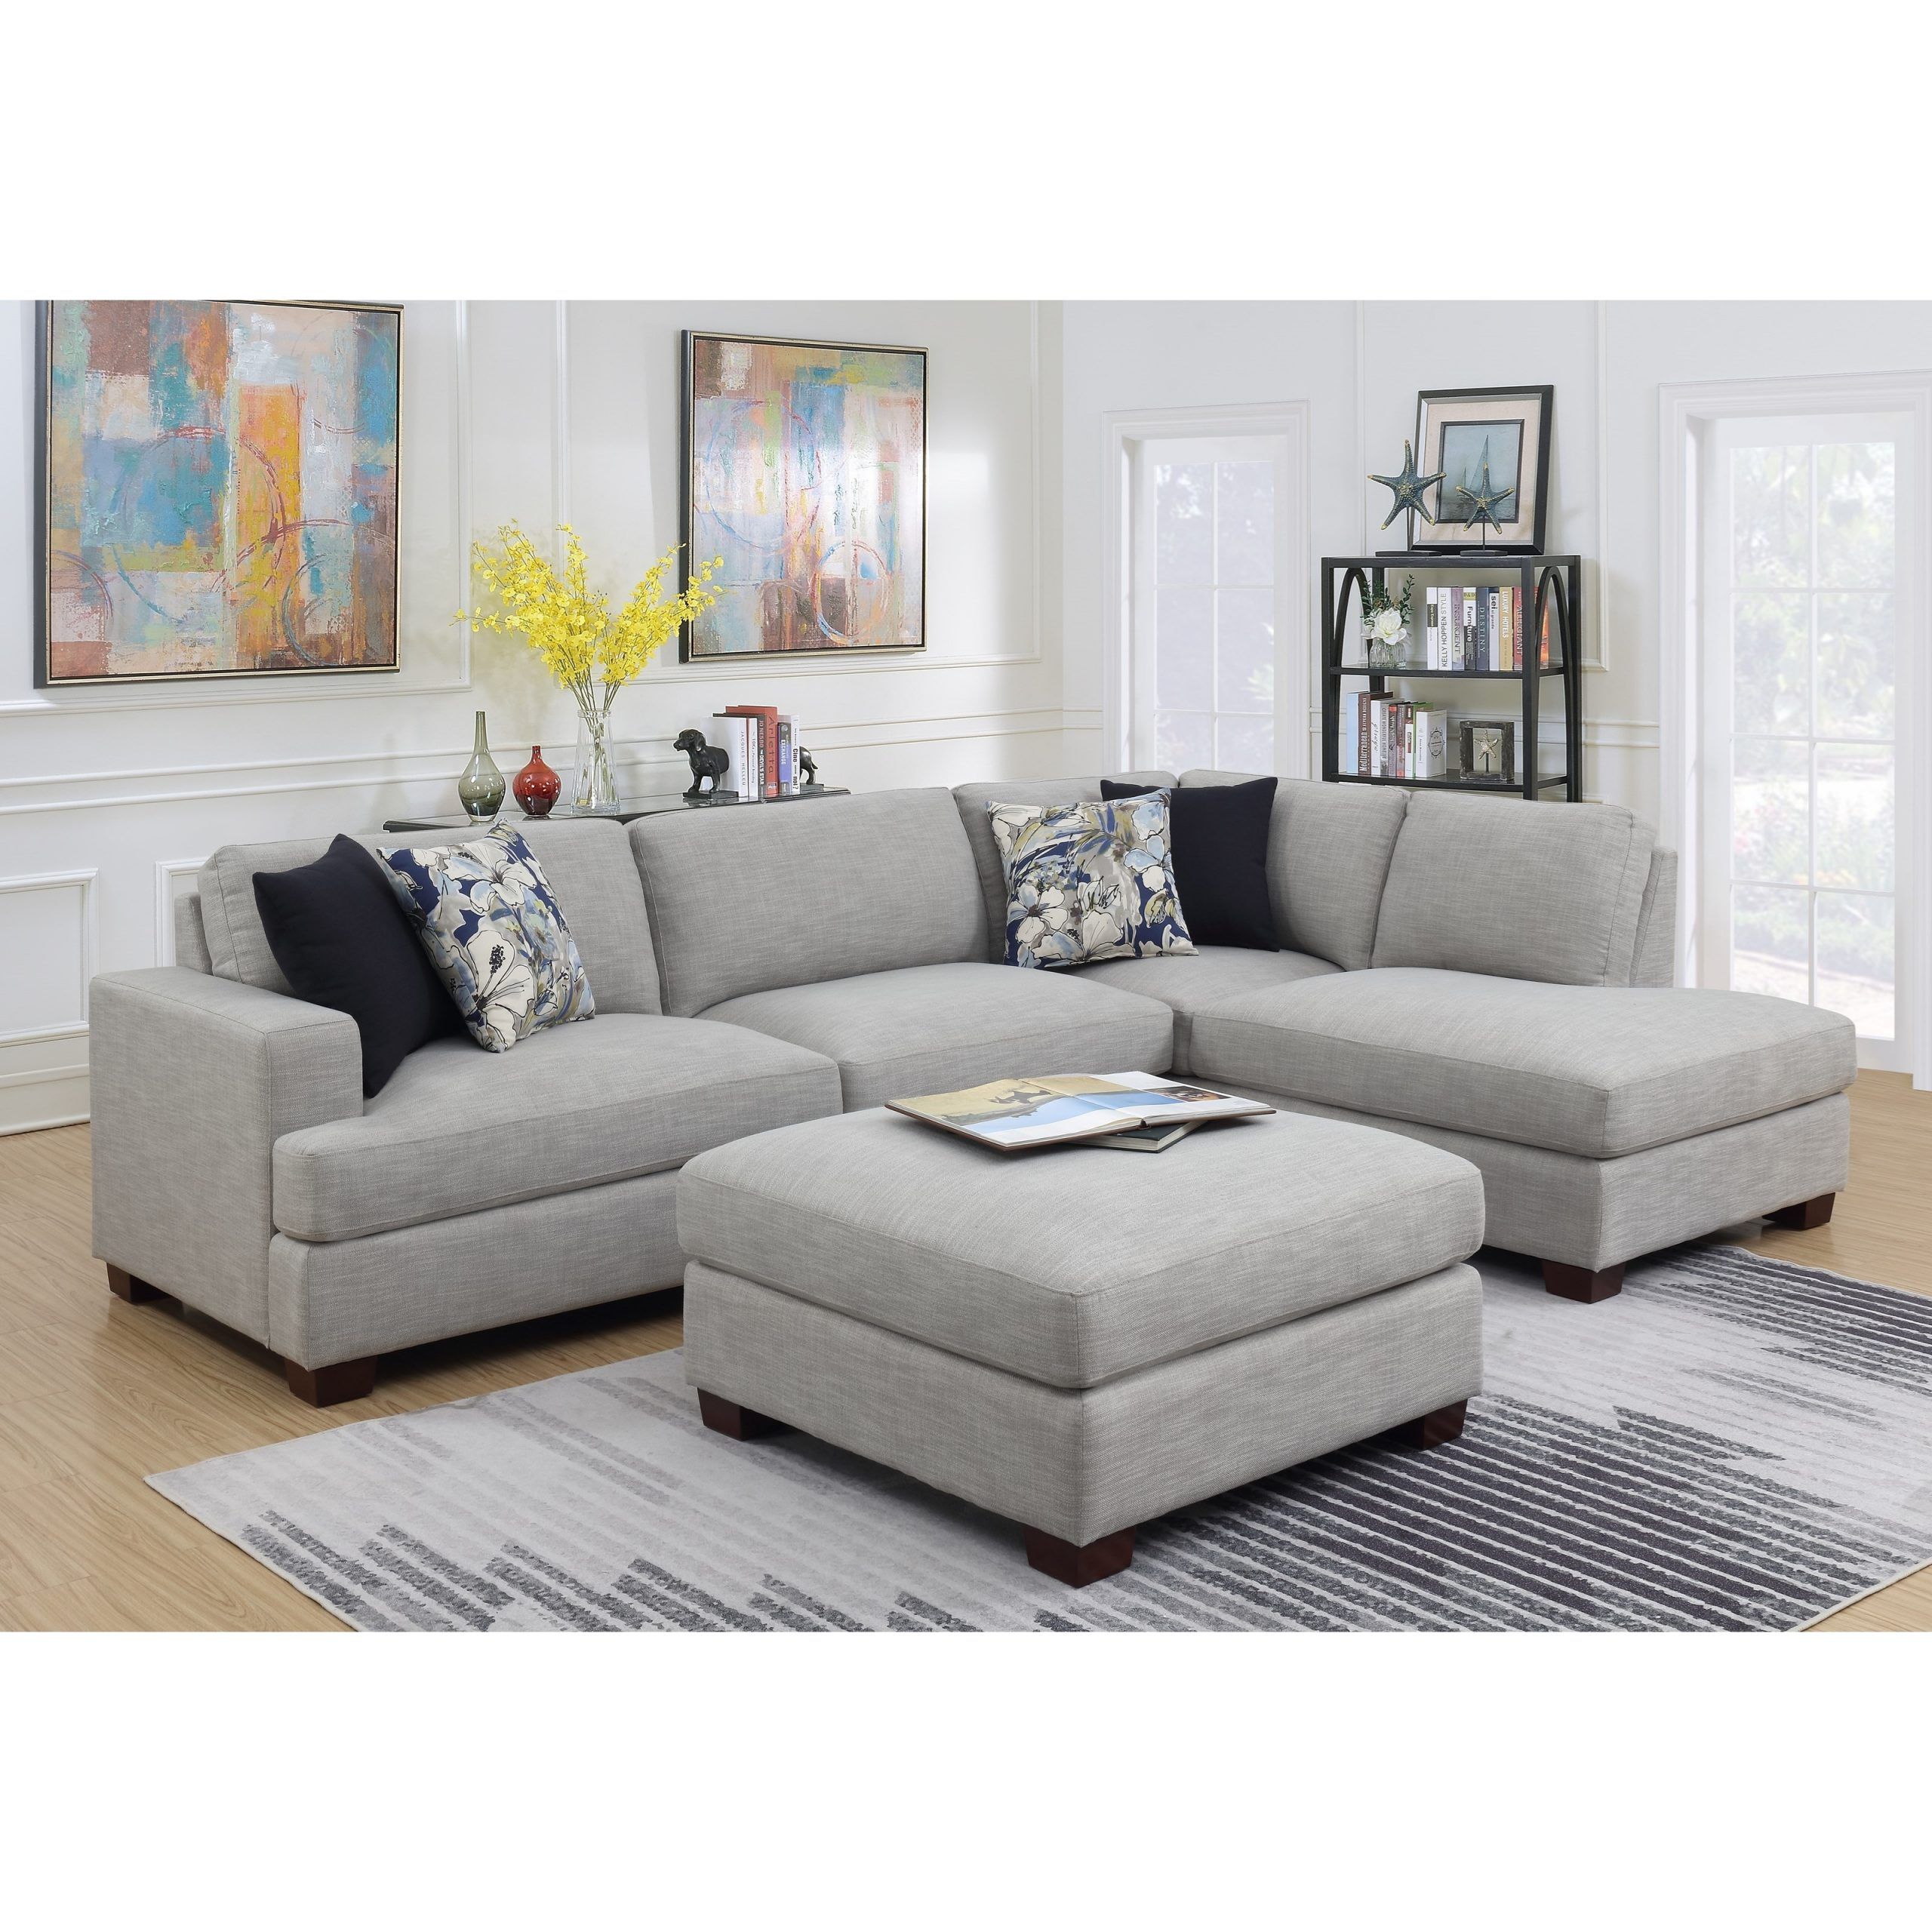 Emerald Vernon Contemporary 2 Piece Sectional Sofa With Within 2pc Burland Contemporary Chaise Sectional Sofas (Photo 1 of 15)